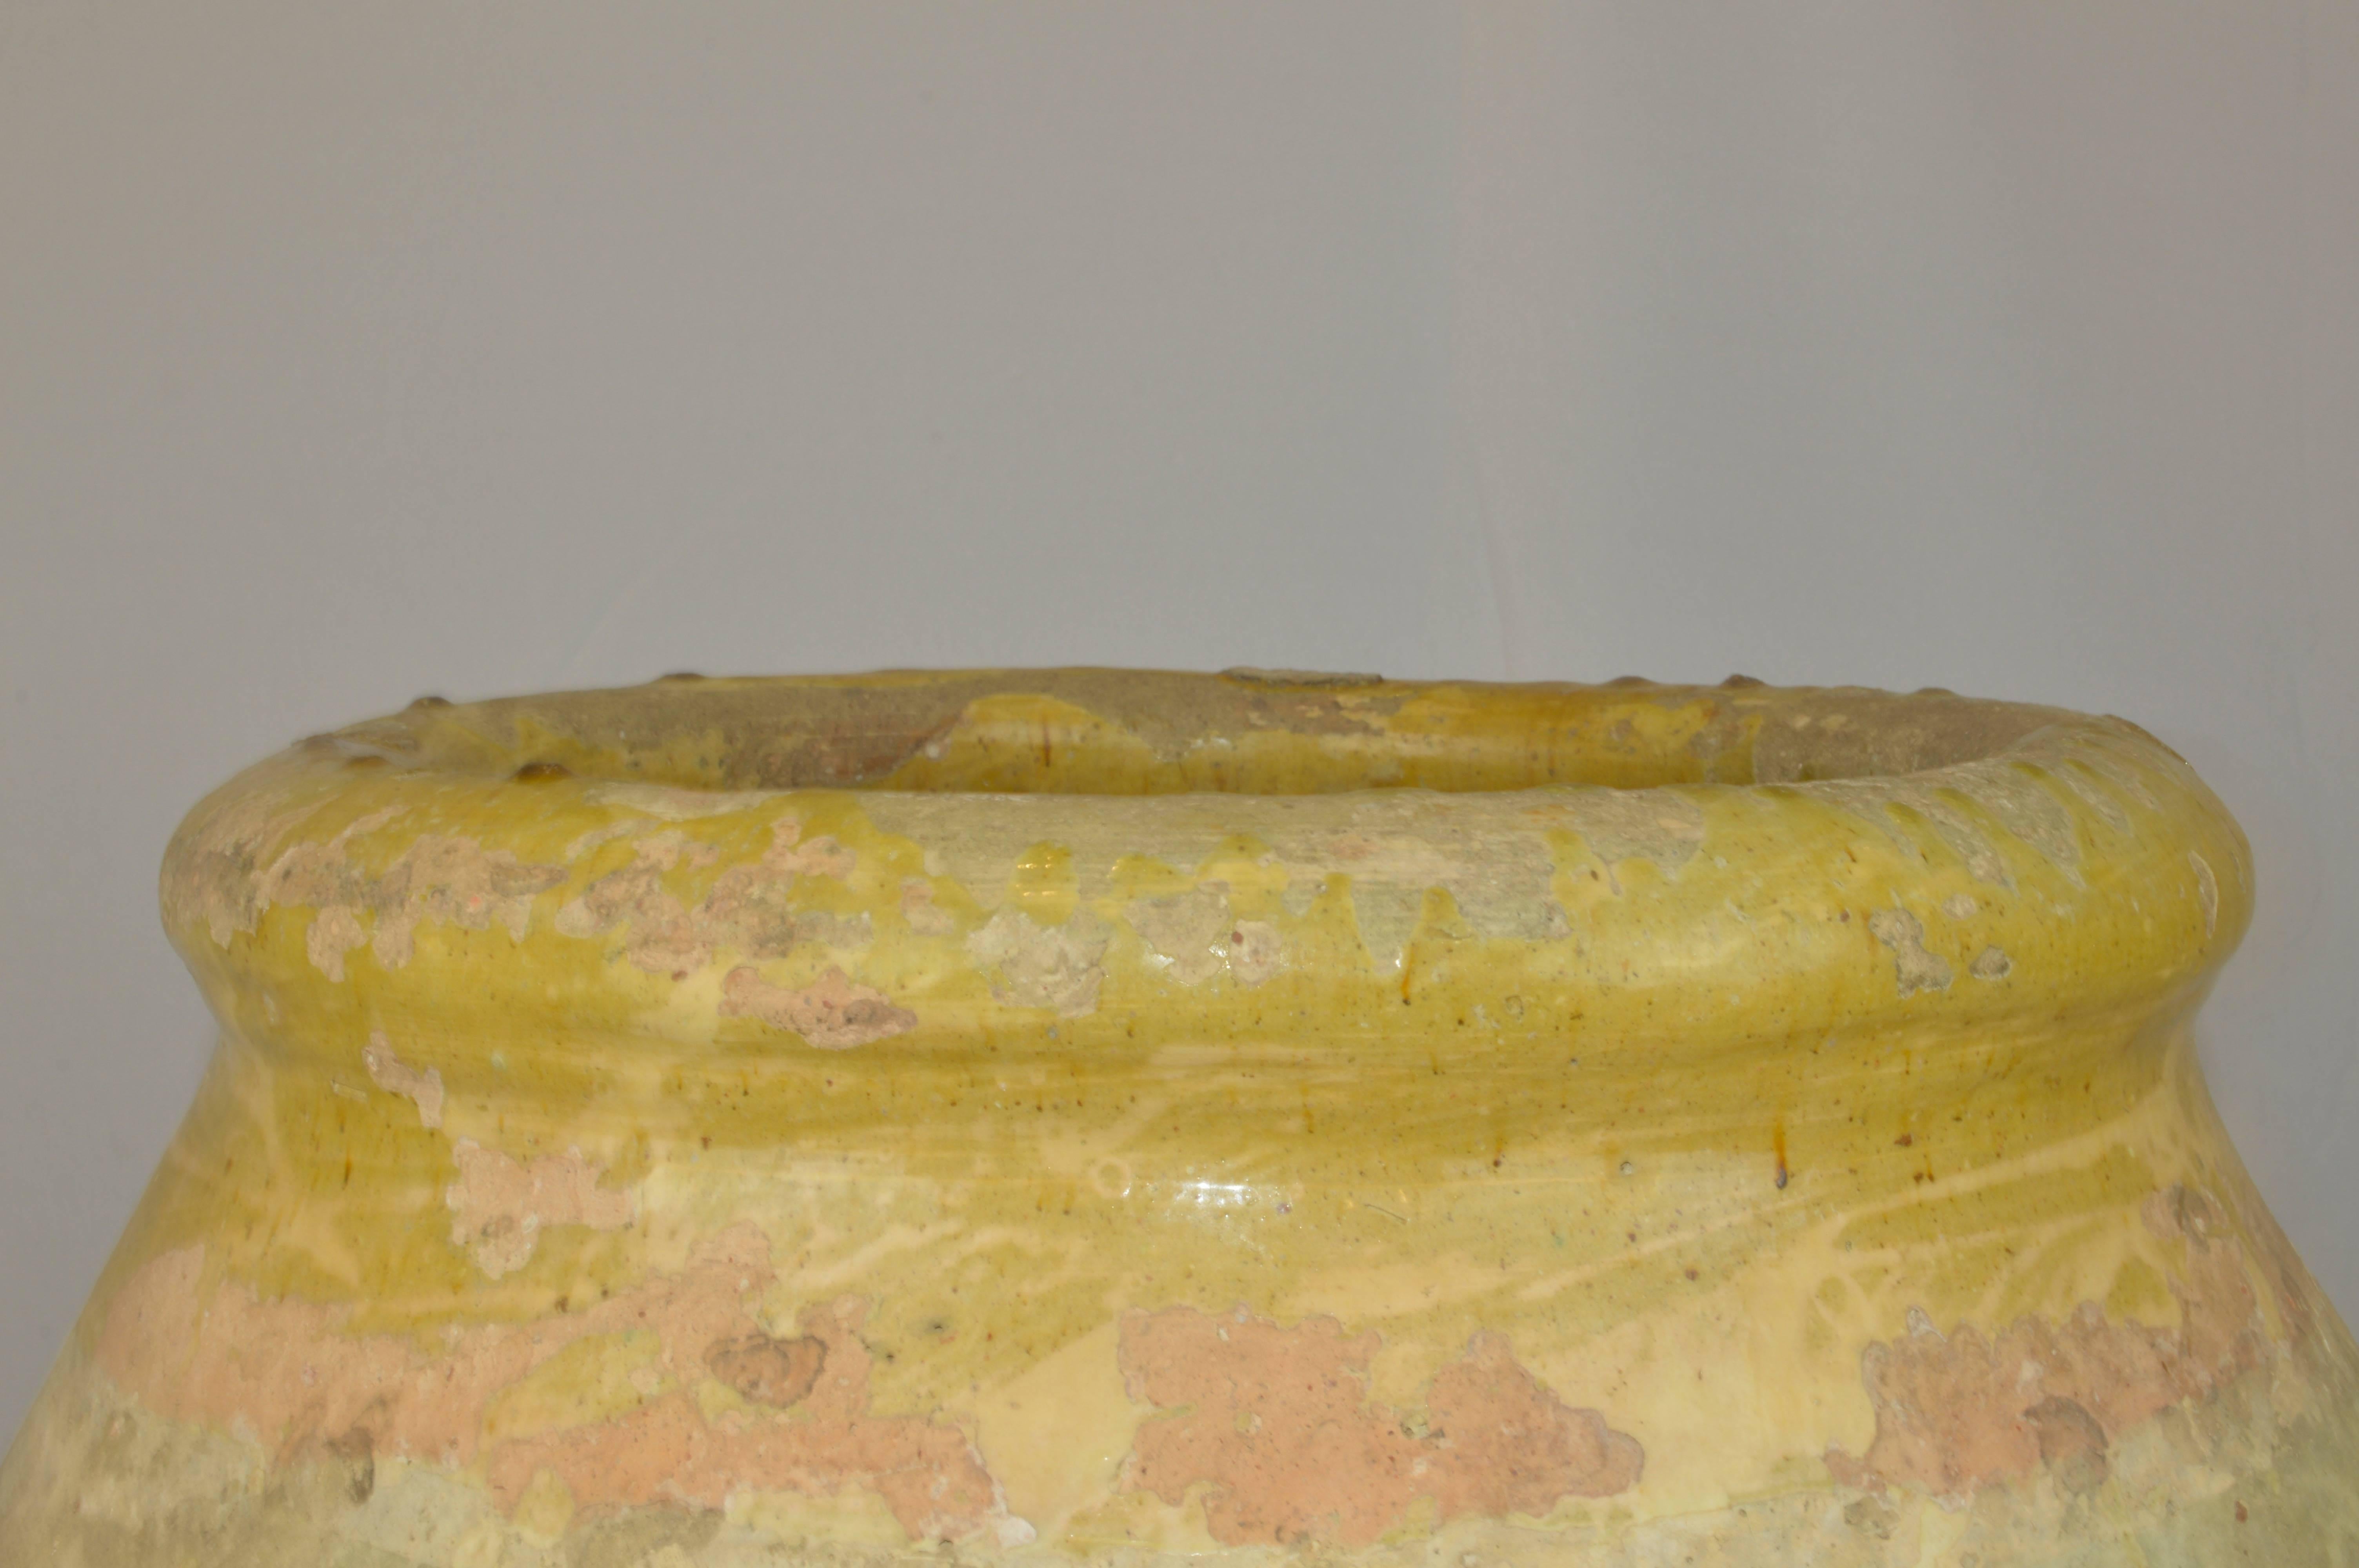 18th Century and Earlier Antique French Terracotta Storage Jar with Yellow Glazed Rim from Biot